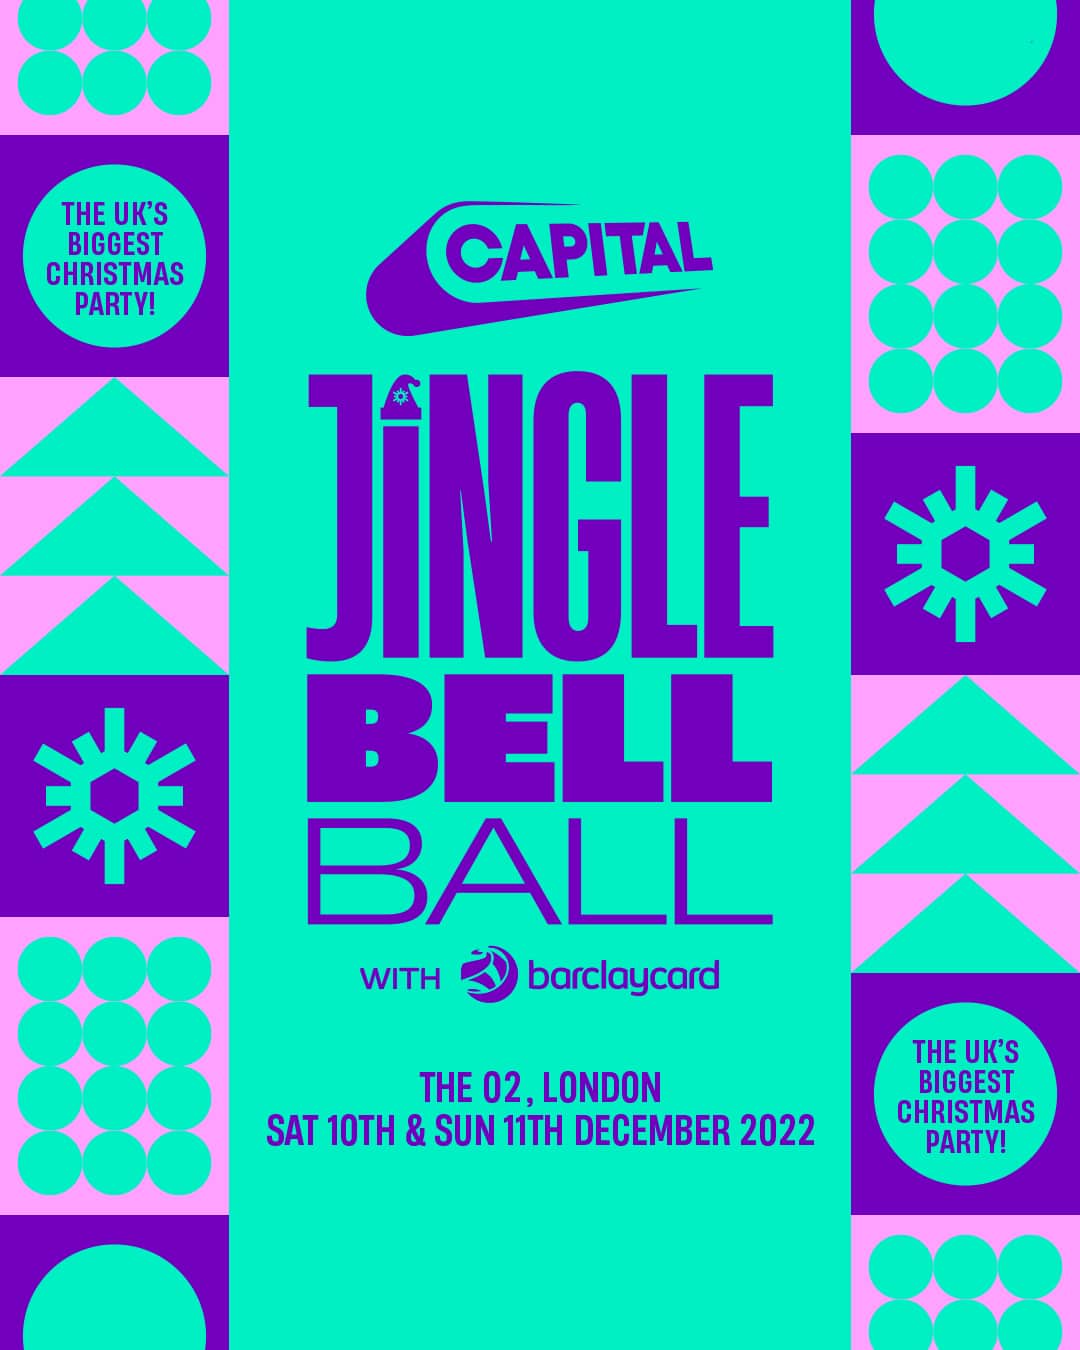 Capital’s Jingle Bell Ball with Barclaycard returns for 2022